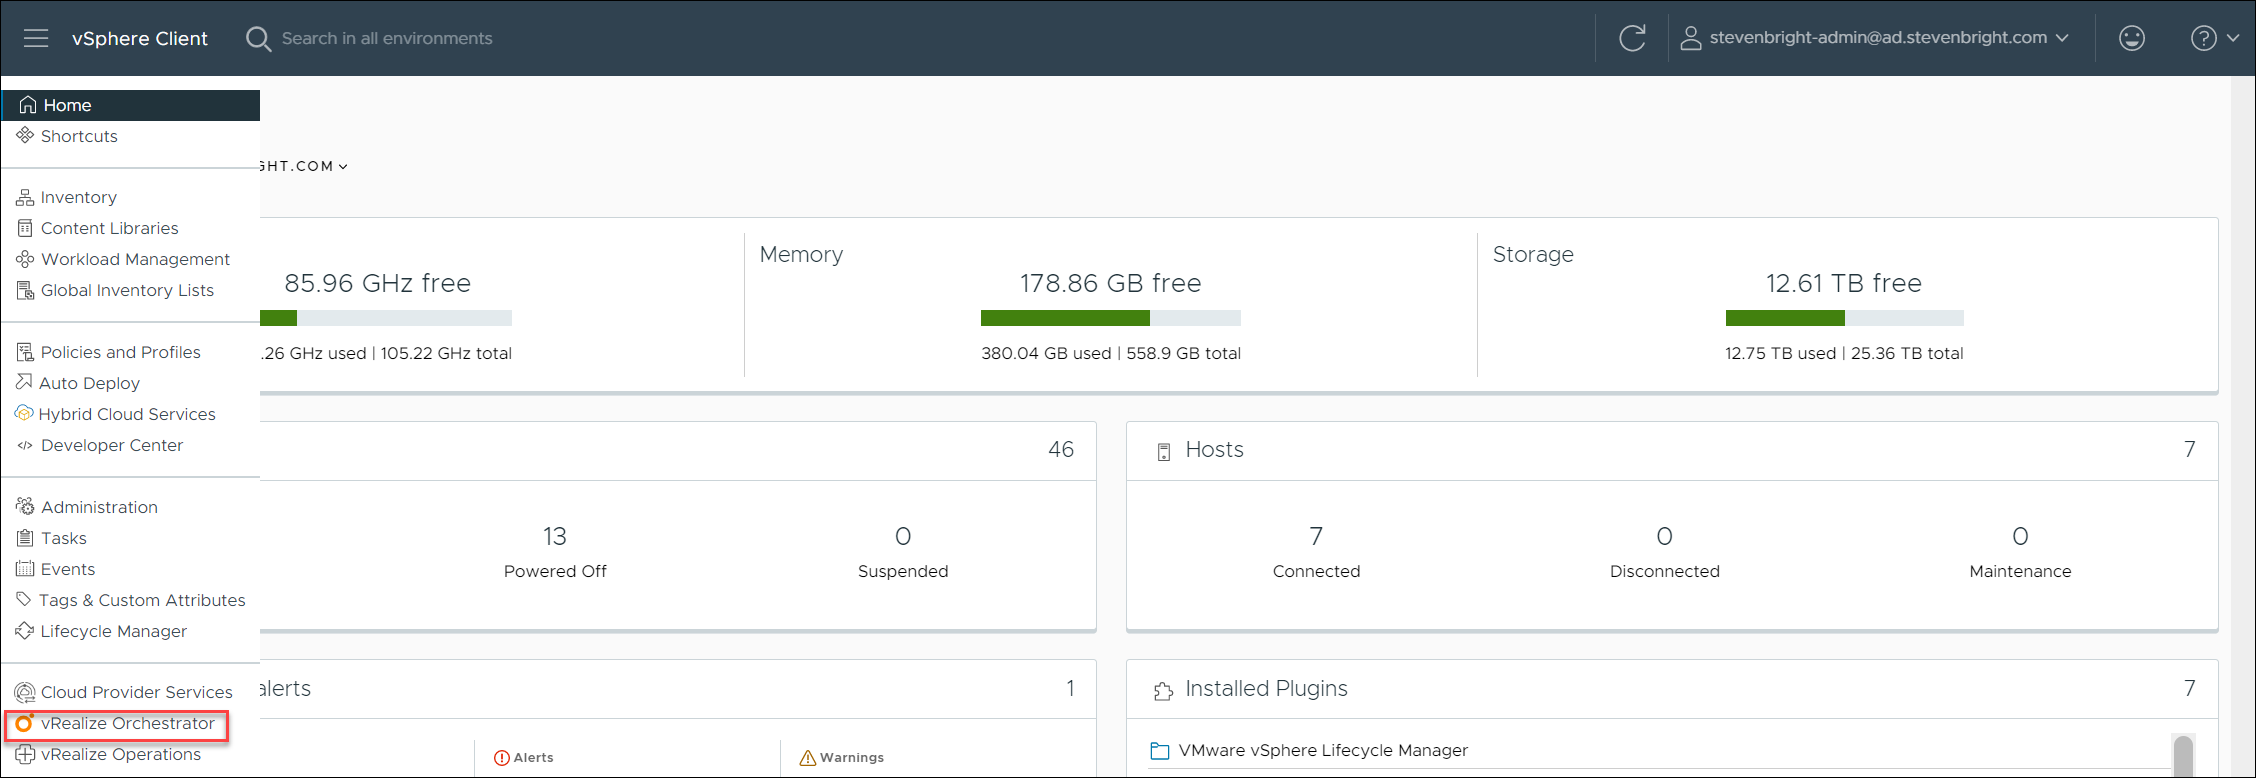 Screenshot showing the new vRealize Orchestrator plug-in added to the VMware vSphere Client’s left navigation panel